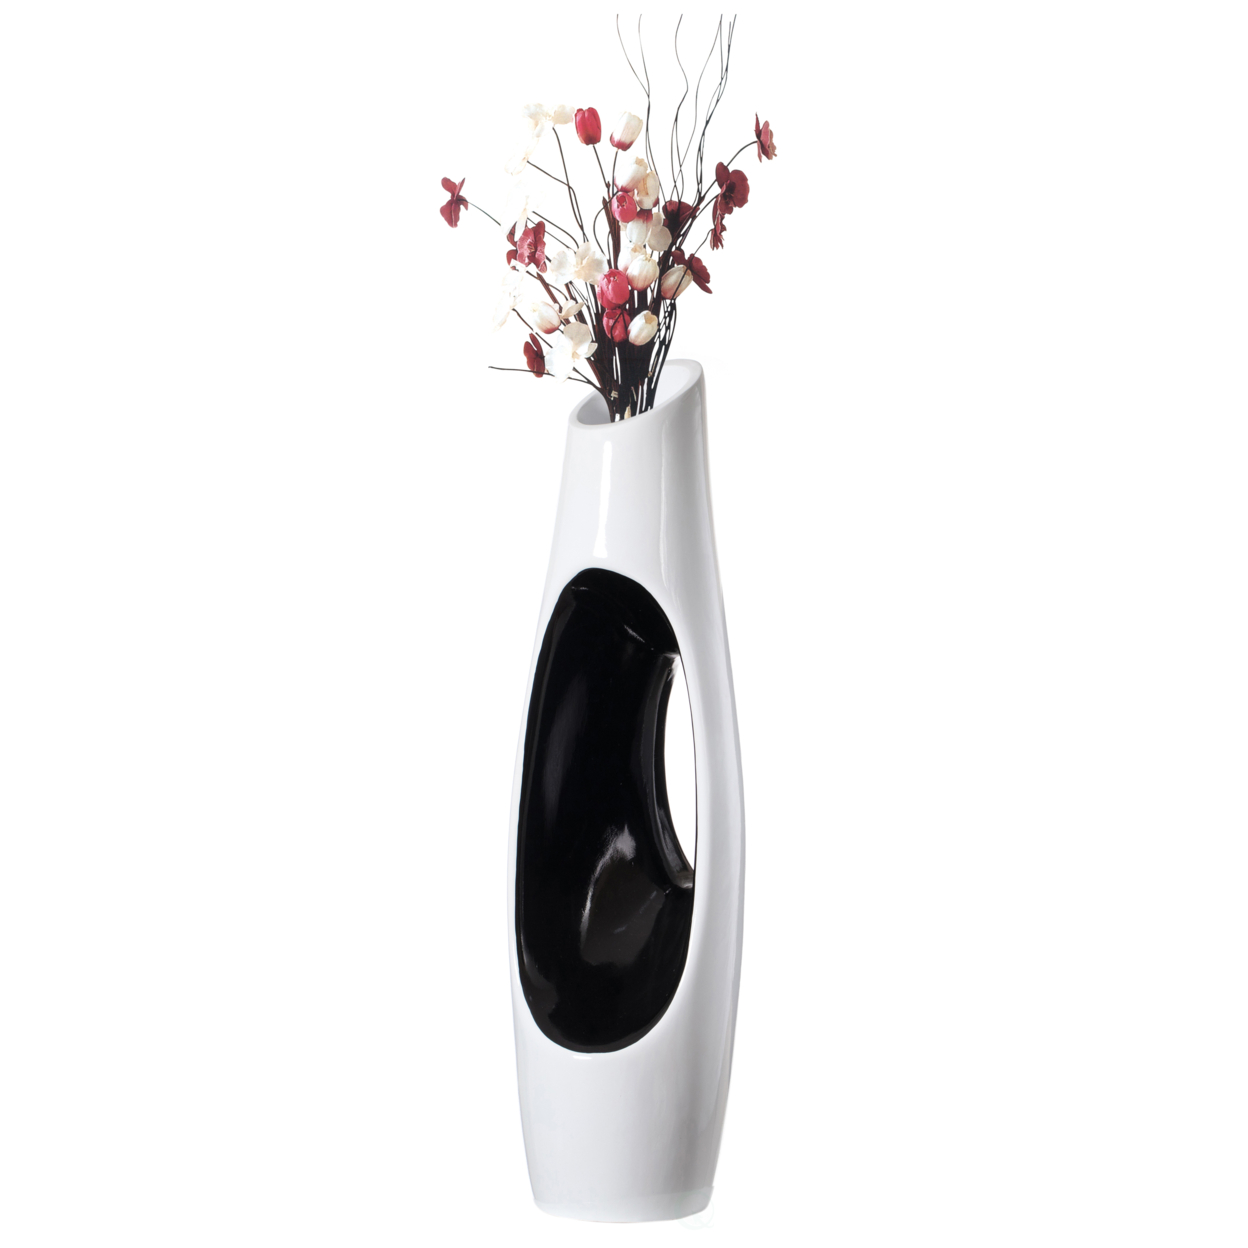 Modern Unique Design White Floor Flower Vase With Black Interior, For Living Room, Entryway Or Dining Room, 43 Inch